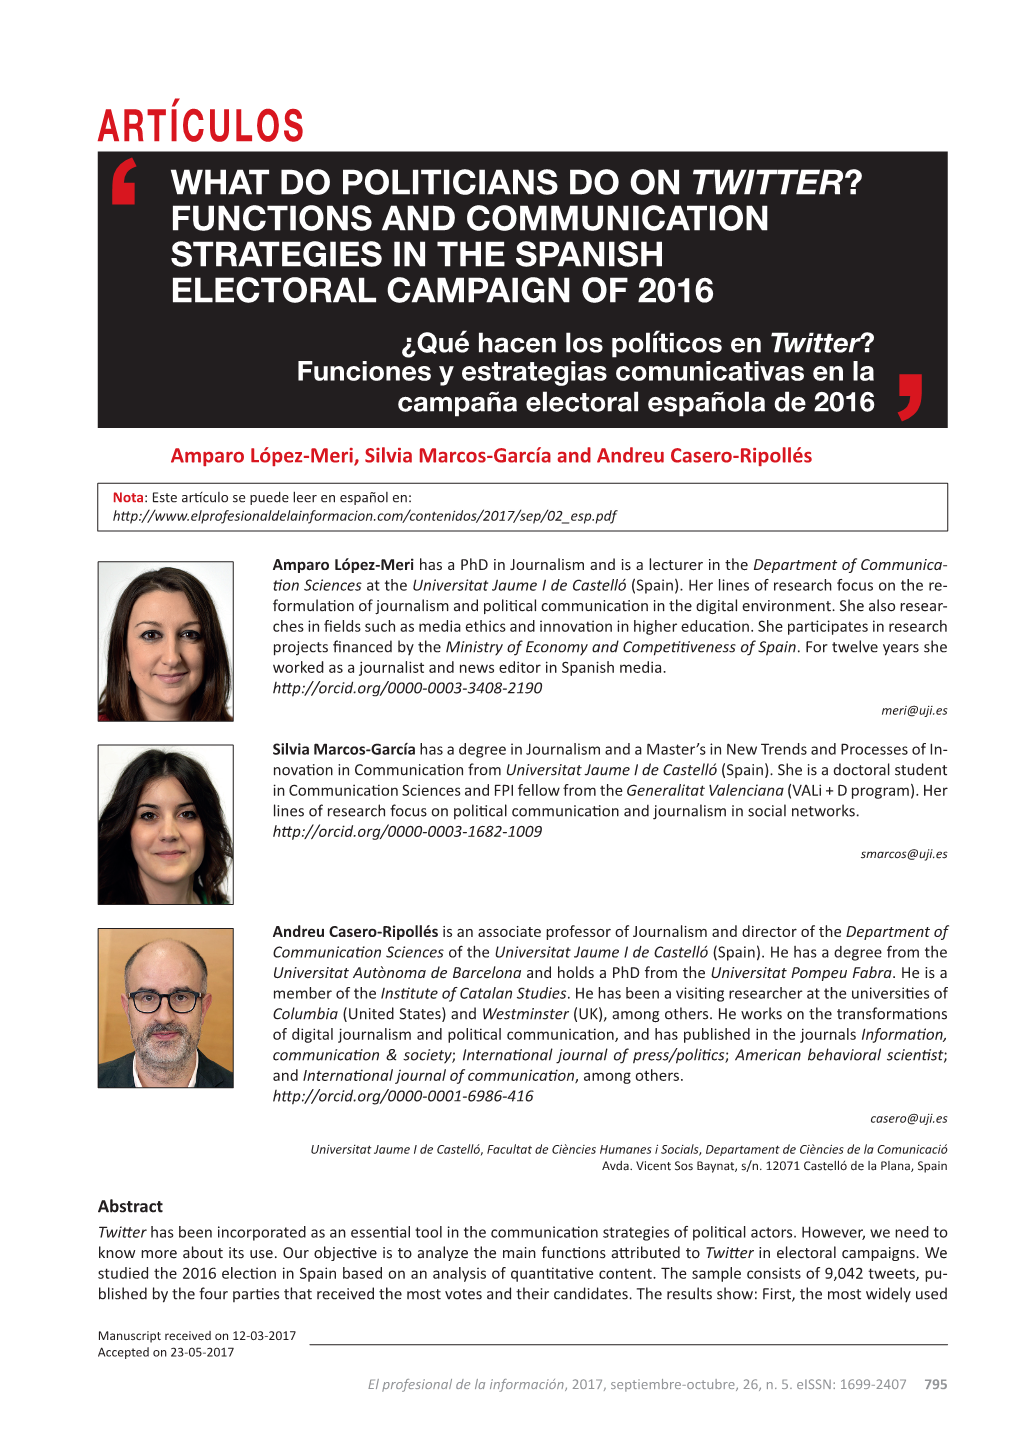 Functions and Communication Strategies in the Spanish Electoral